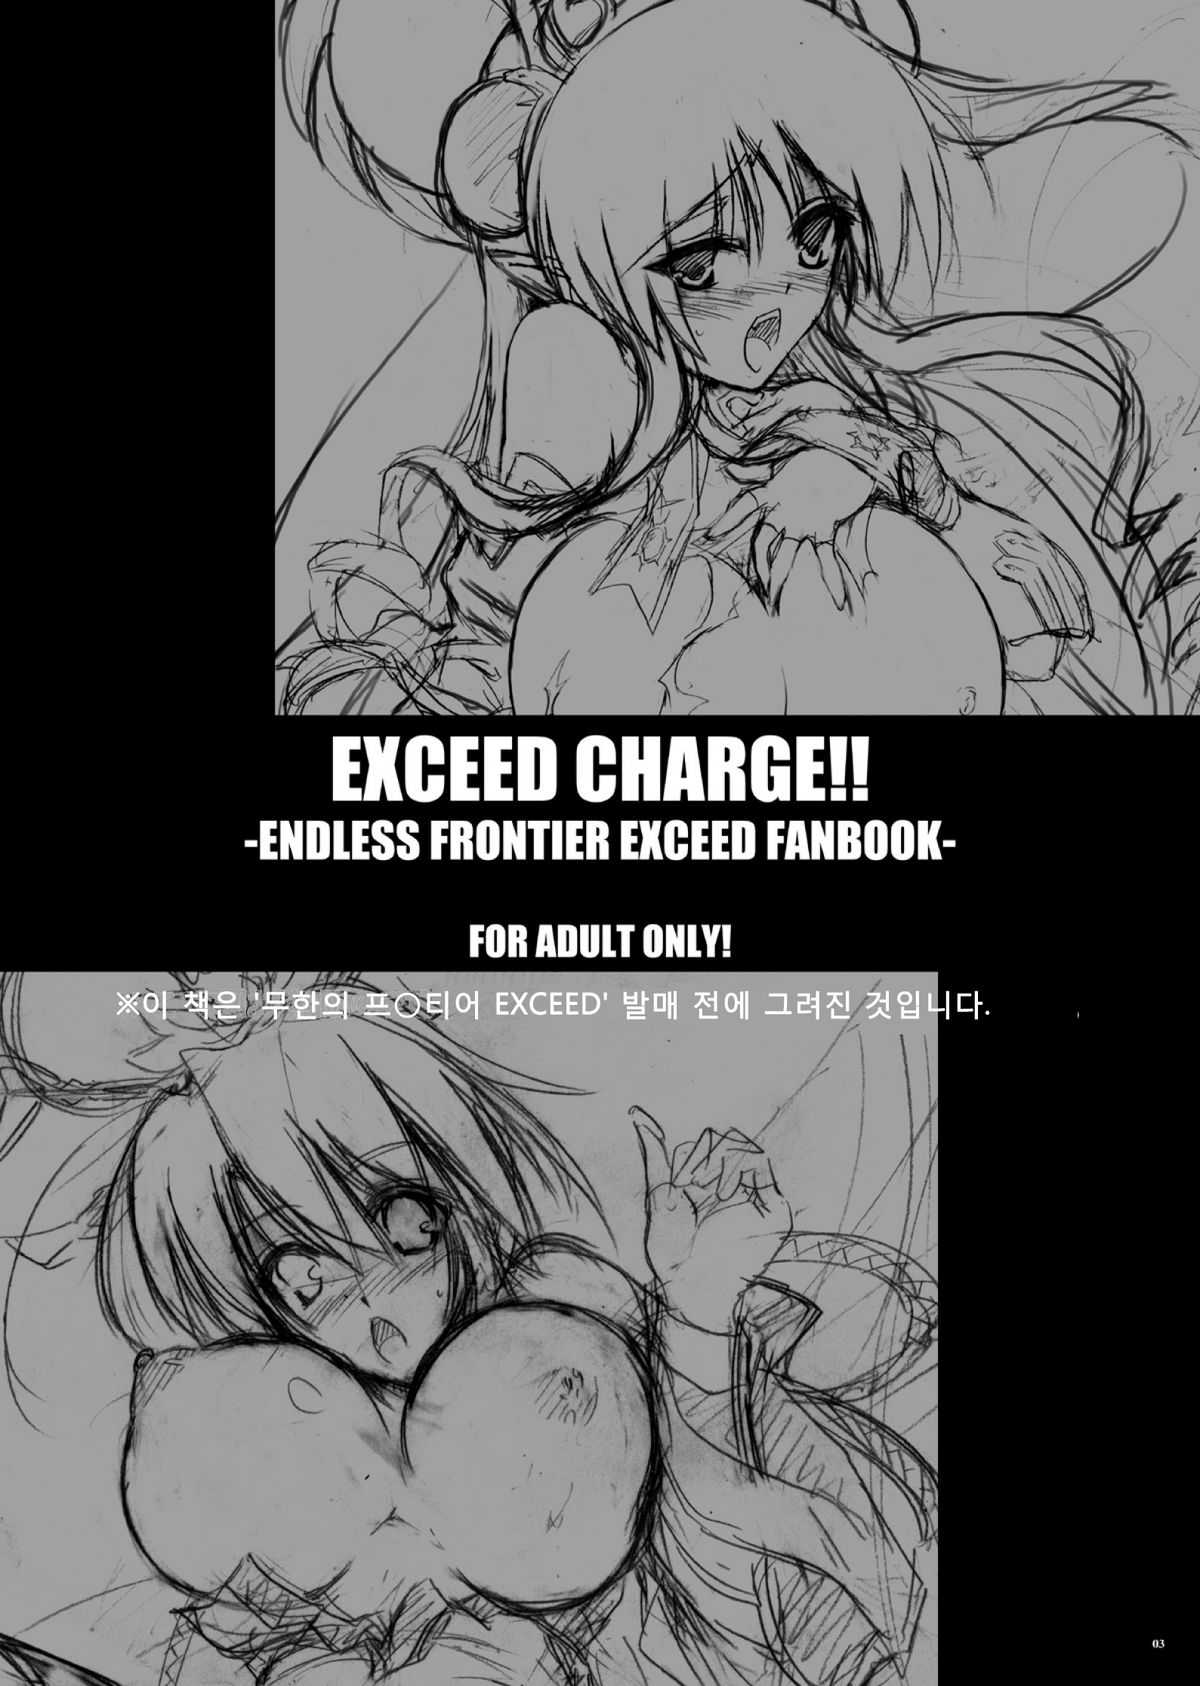 [C.R`s NEST] EXCEED CHARGE!! (Super Robot Wars) (korean) (サンクリ46) [C.R’s NEST] EXCEED CHARGE!! (スーパーロボット大戦) [韓国翻訳]